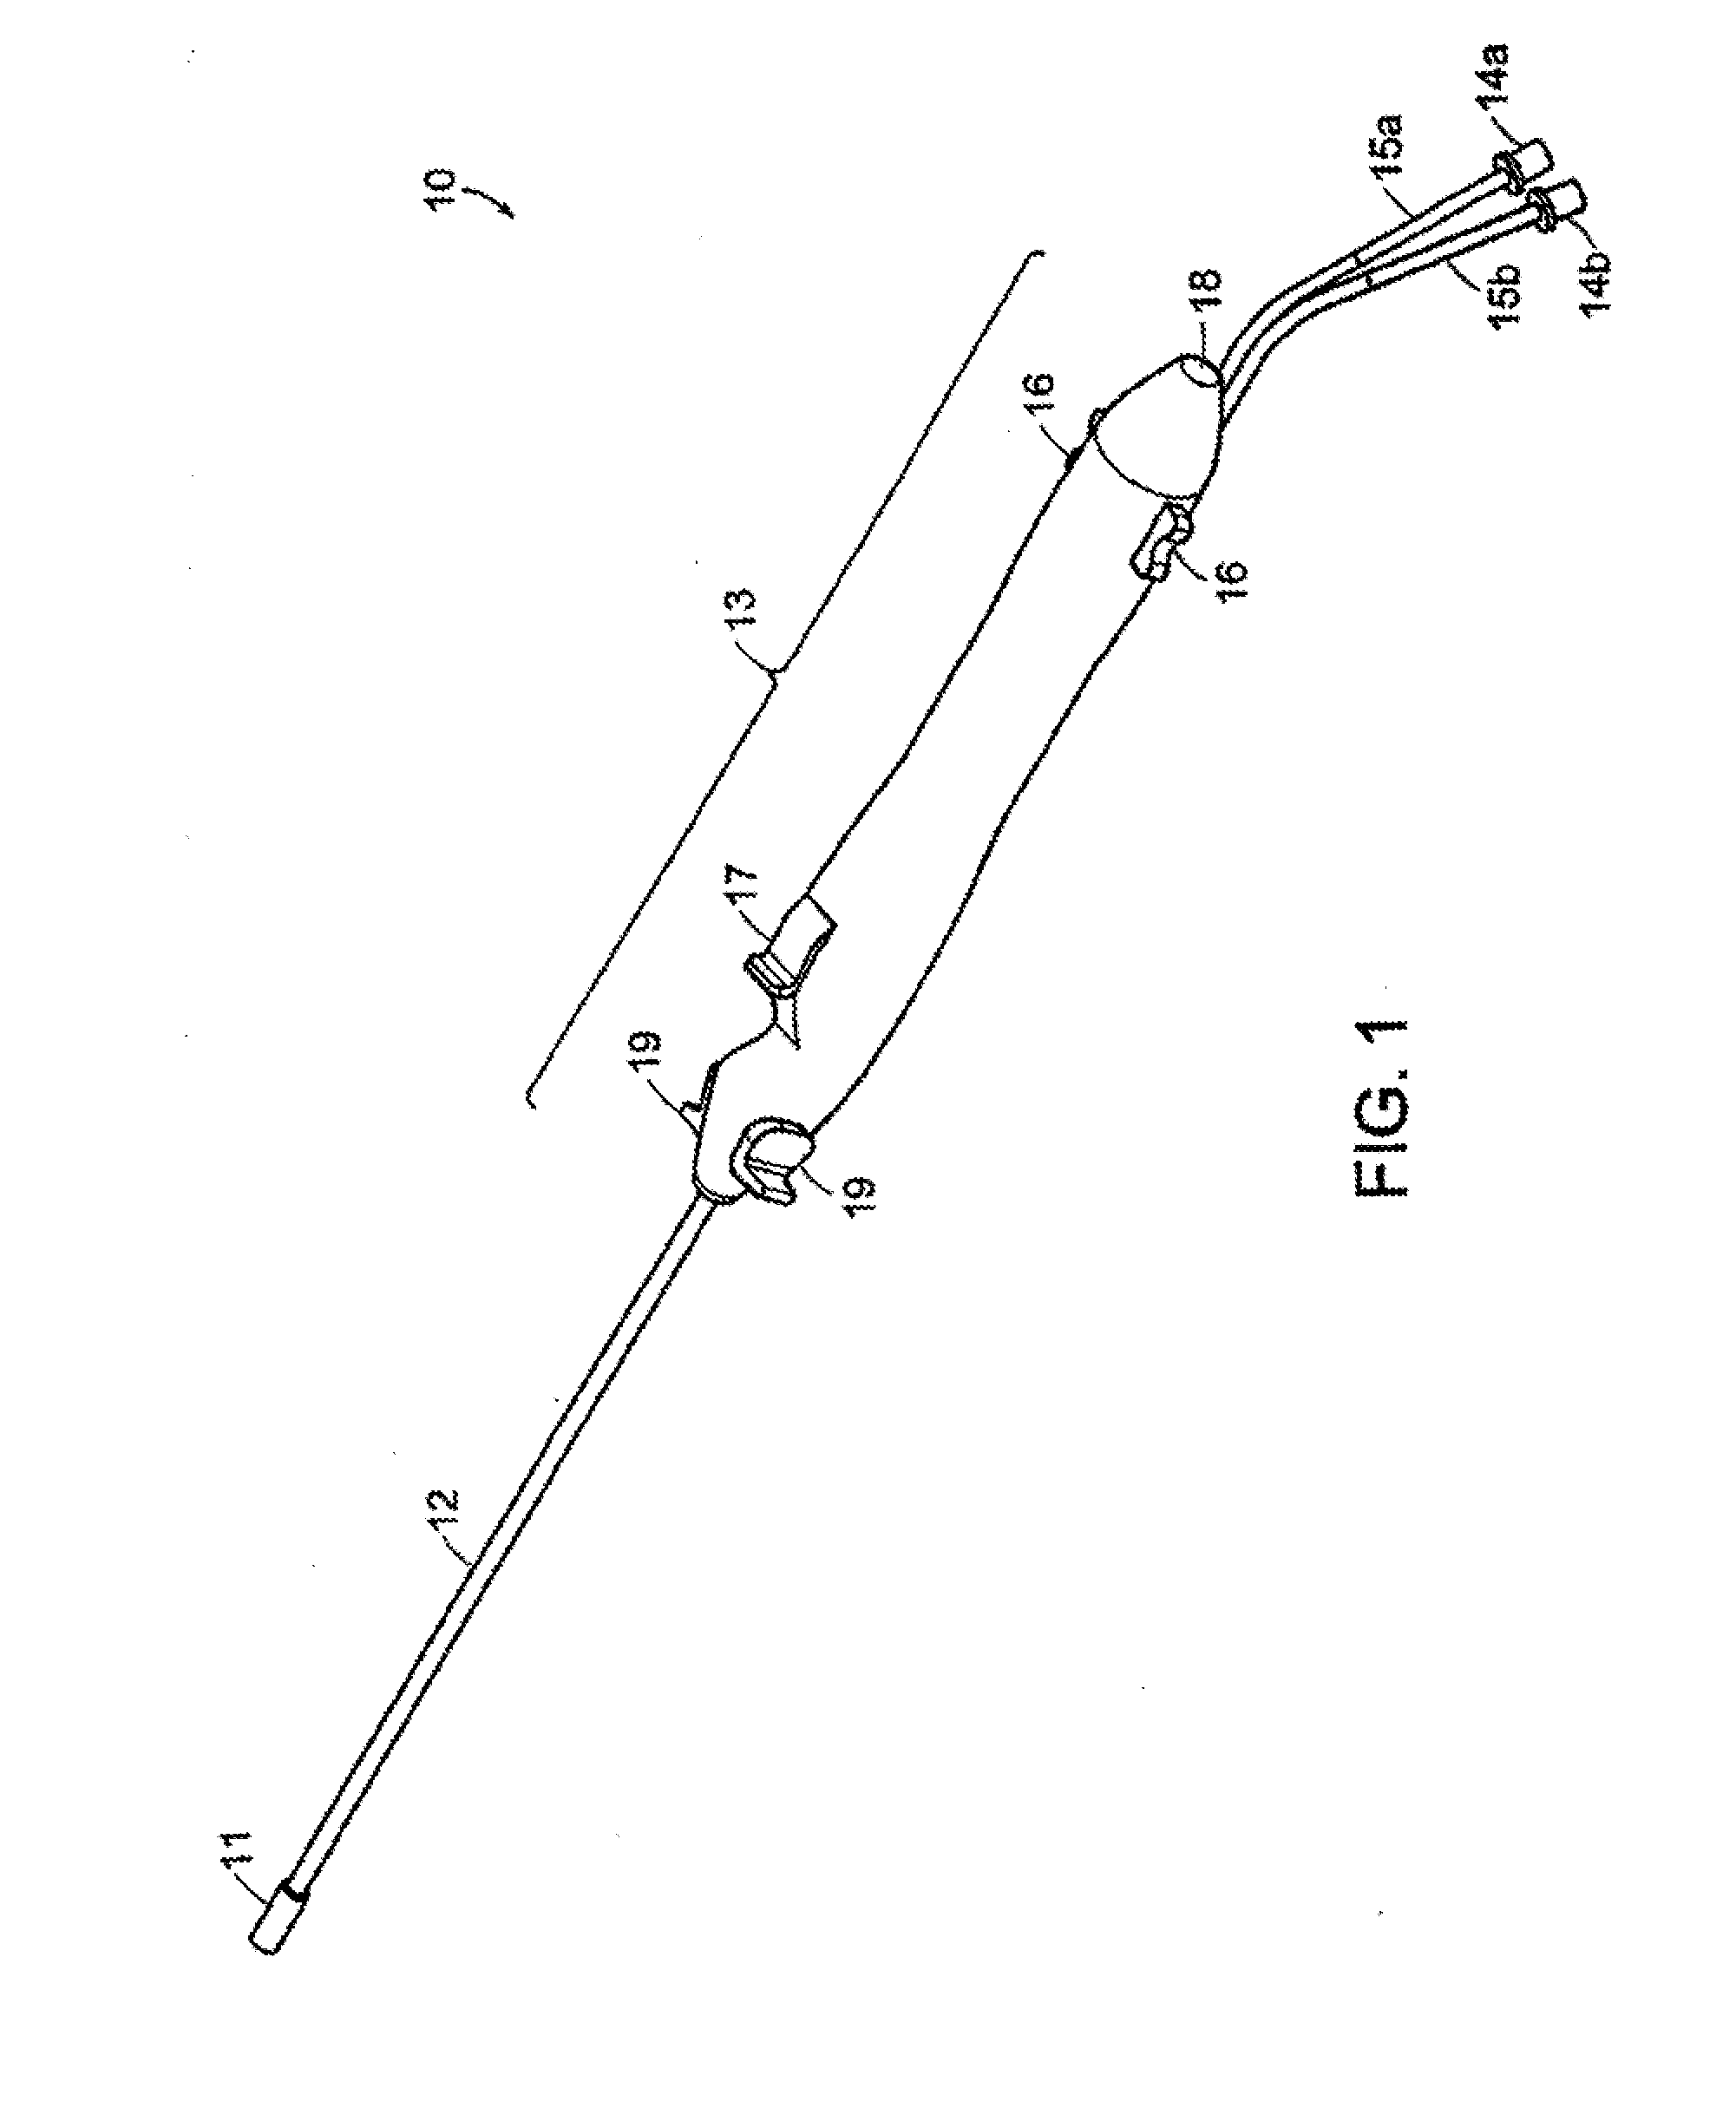 Endoscopic Tissue Separator Surgical Device